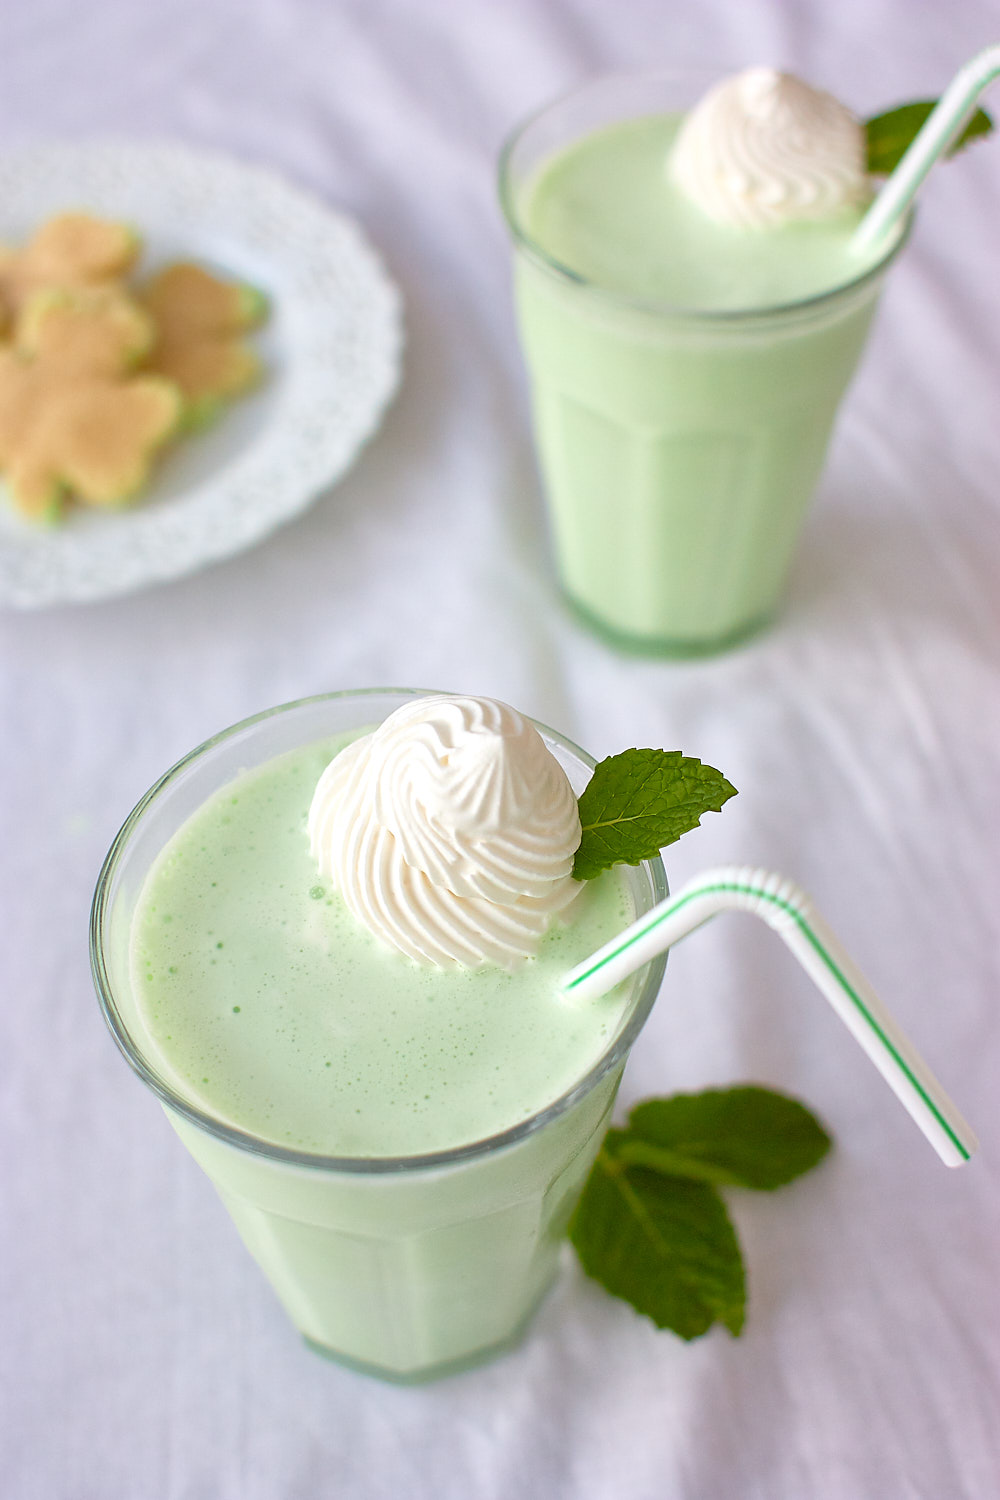 Green mint shakes on a table with mint and shamrock shaped cookies. 